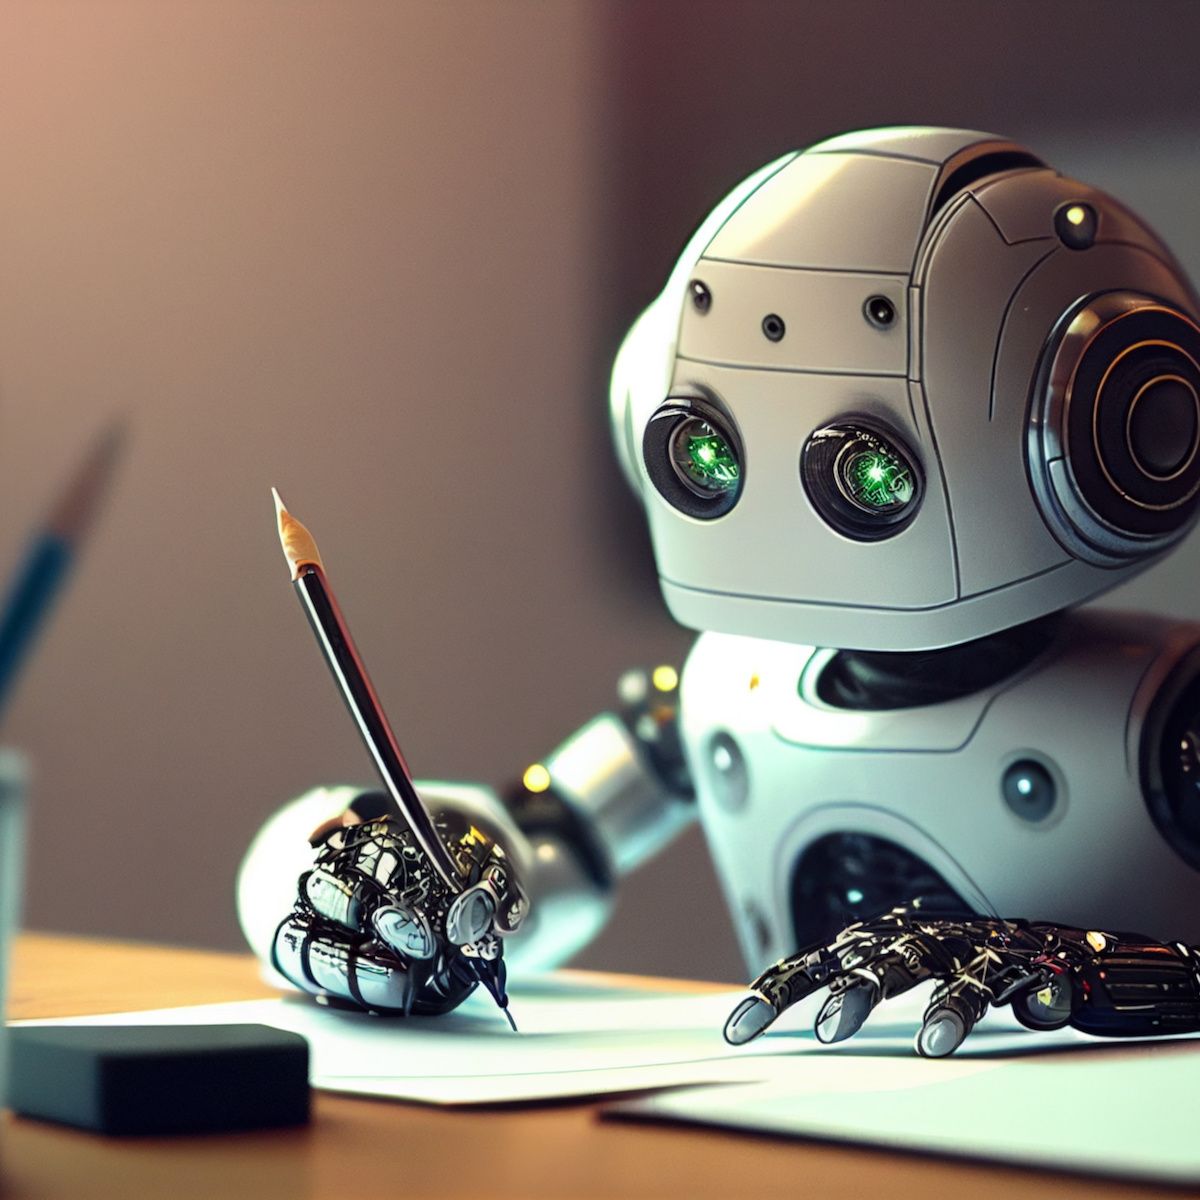 A robot uses a pencil to scribble notes in an illustration that represents AI and ChatGPT.